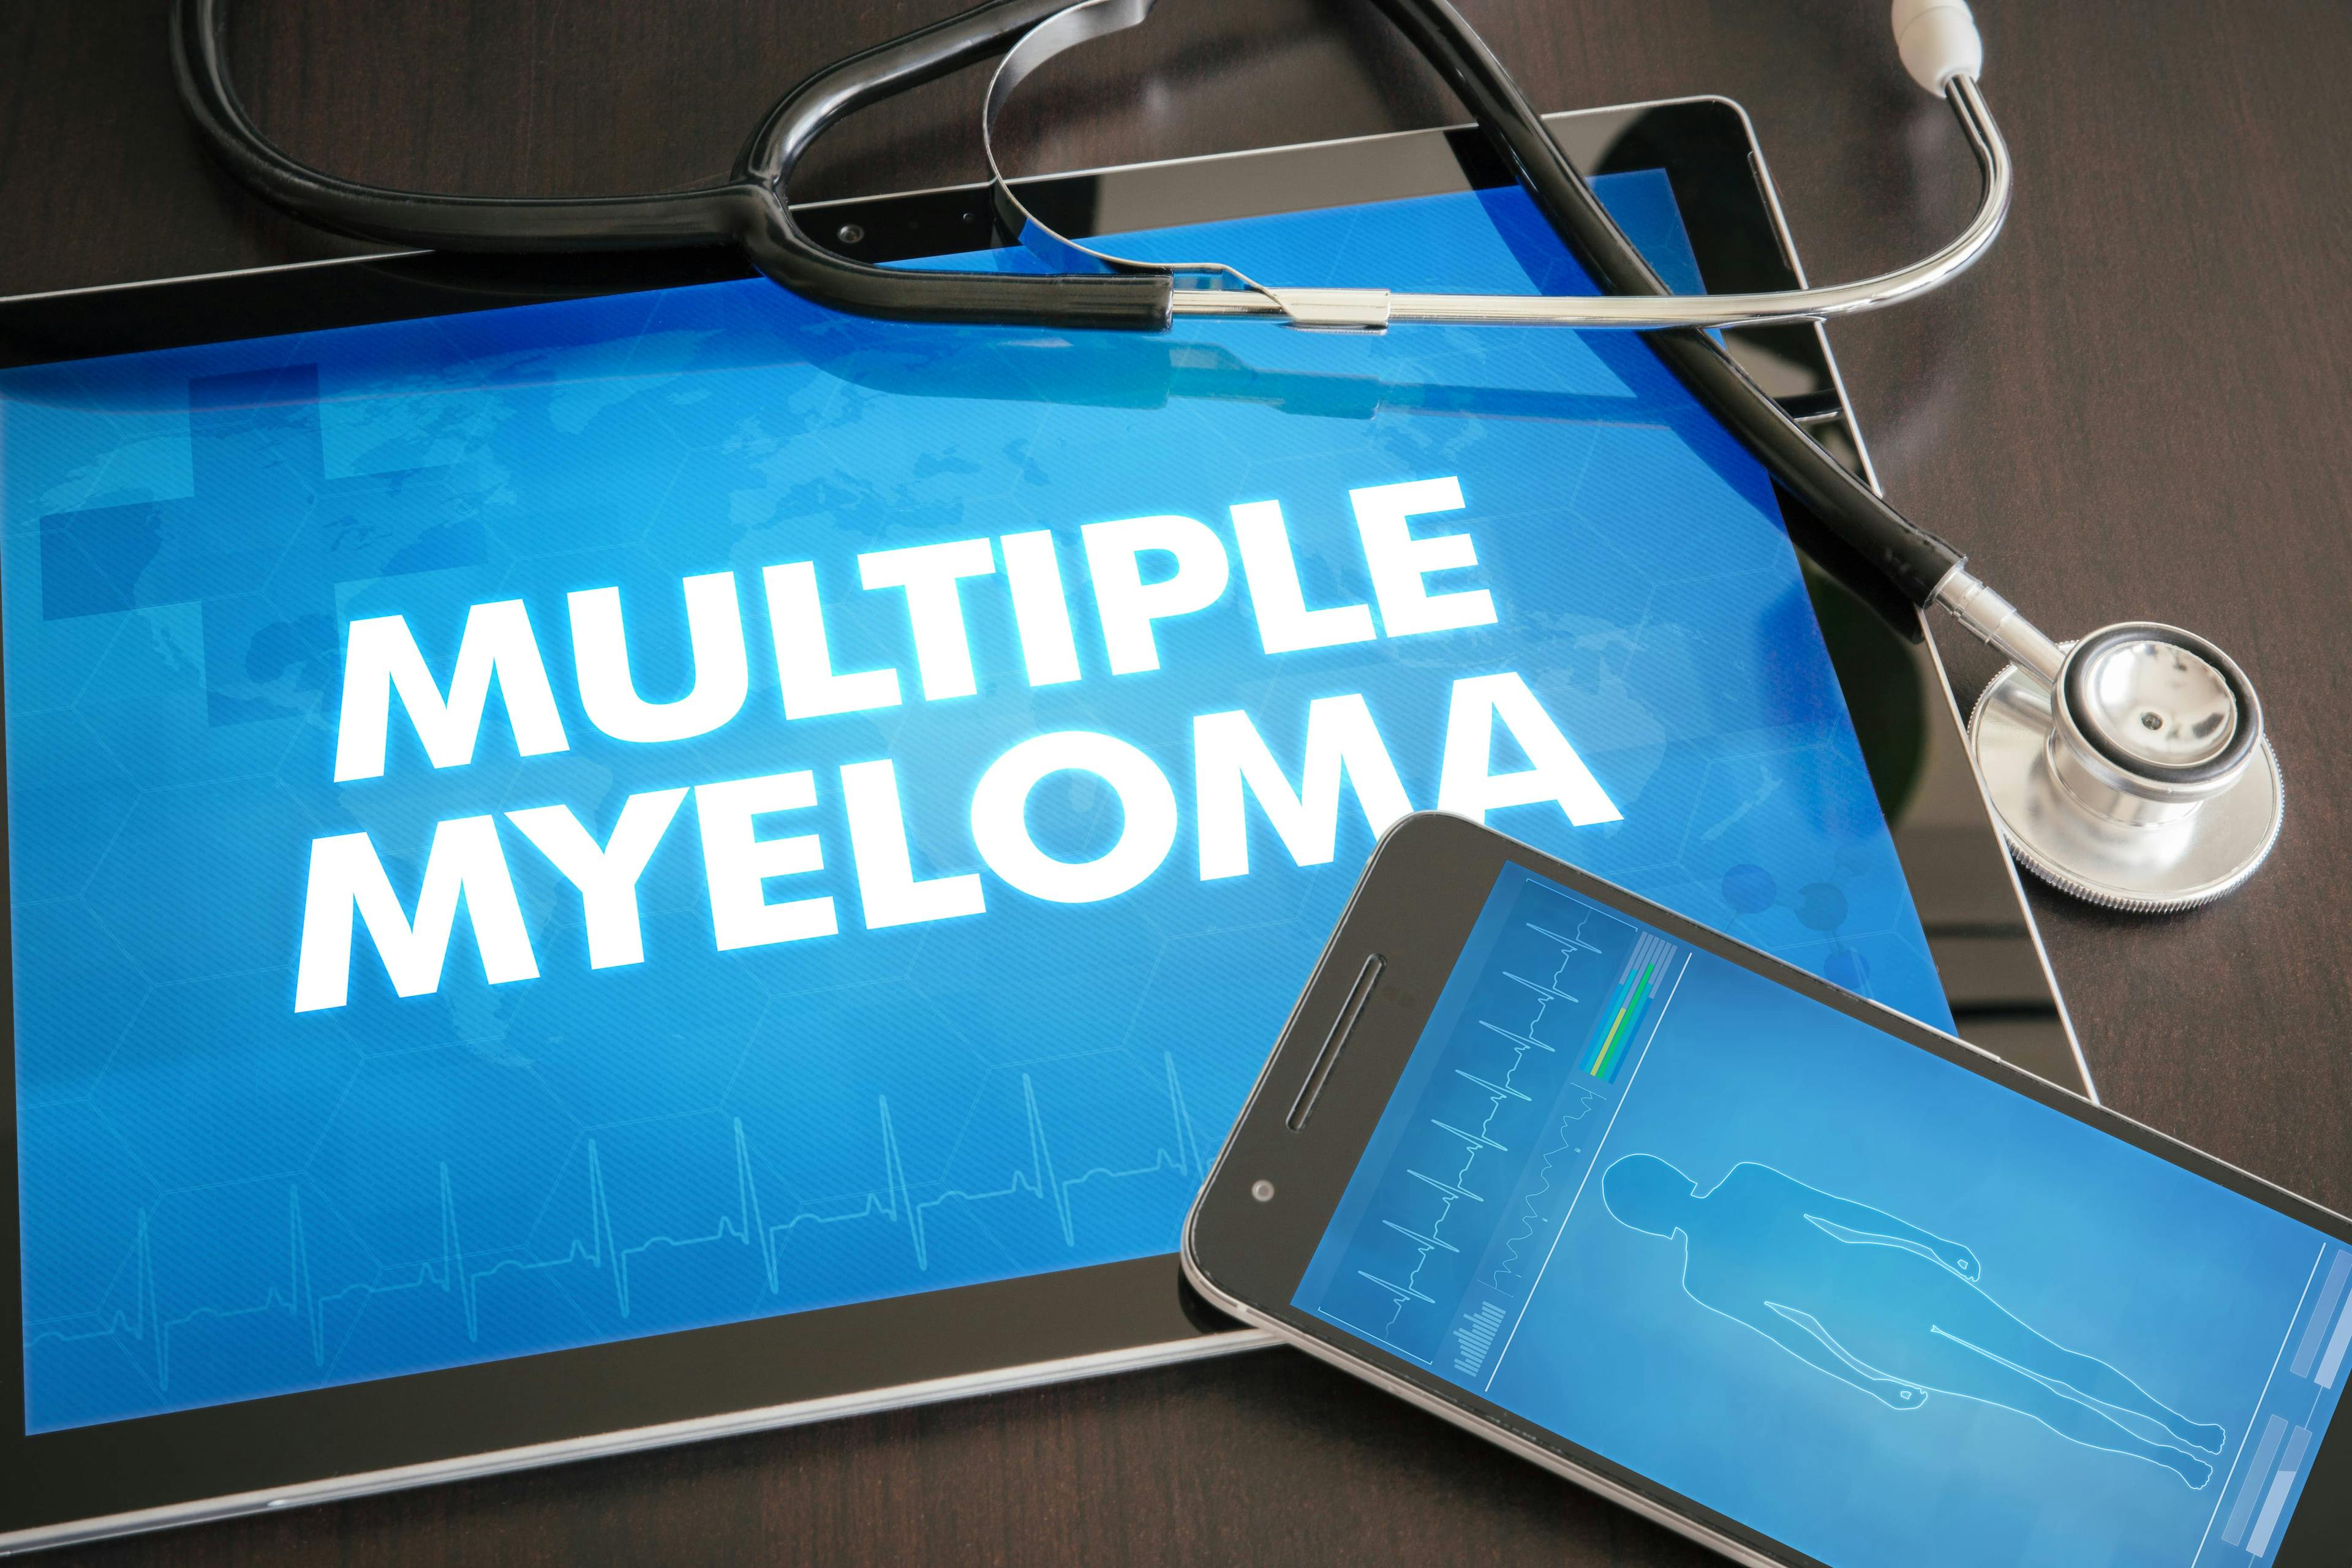 Multiple Myeloma spelled out on a screen